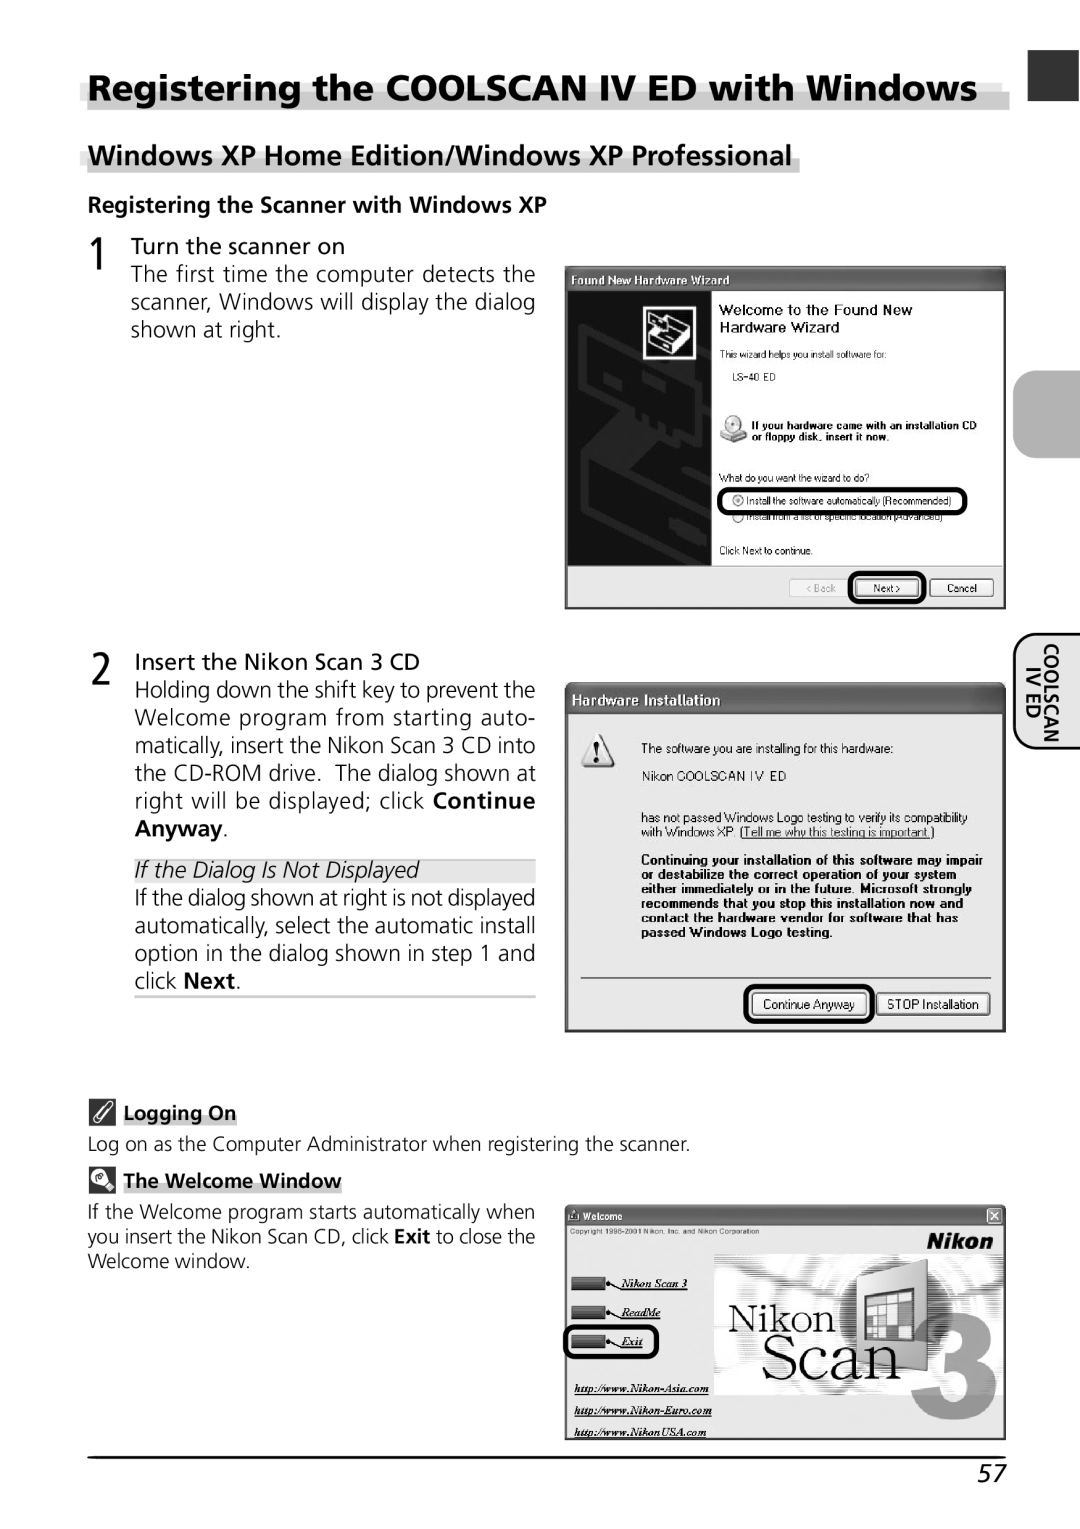 Nikon LS4000 user manual Registering the COOLSCAN IV ED with Windows, Windows XP Home Edition/Windows XP Professional 